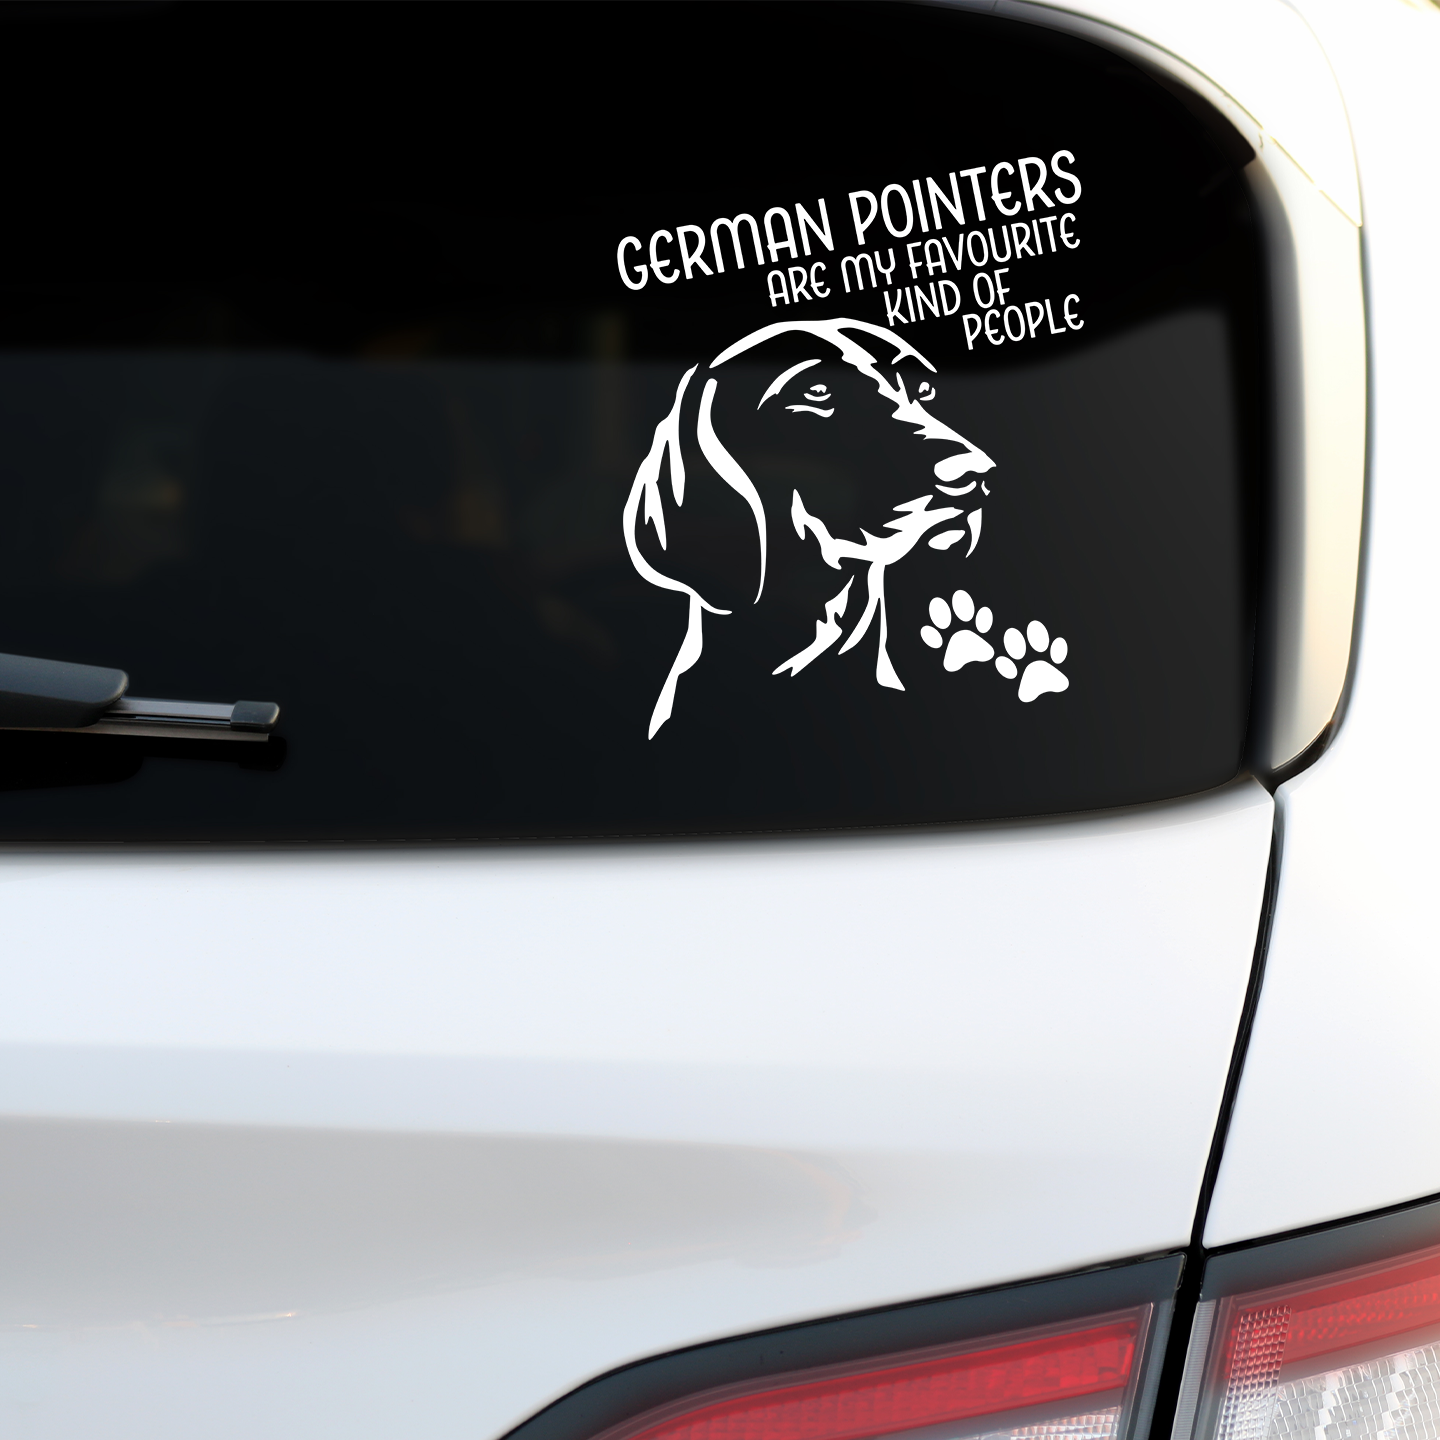 German Pointers Are My Favourite Kind Of People Sticker